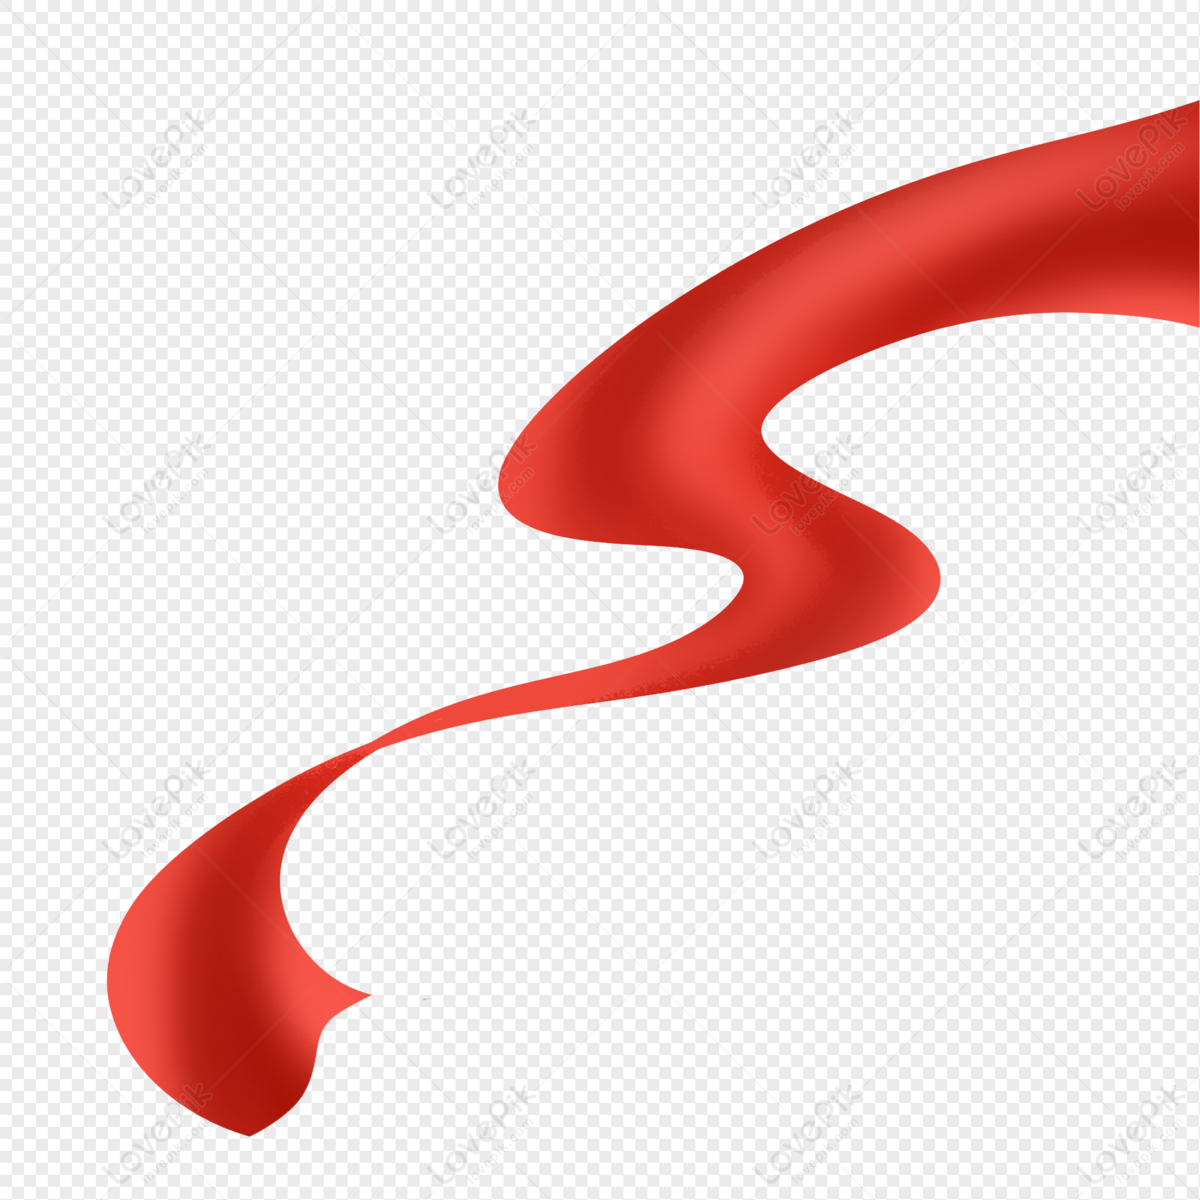 Red Silk Ribbon PNG Hd Transparent Image And Clipart Image For Free  Download - Lovepik | 401464744